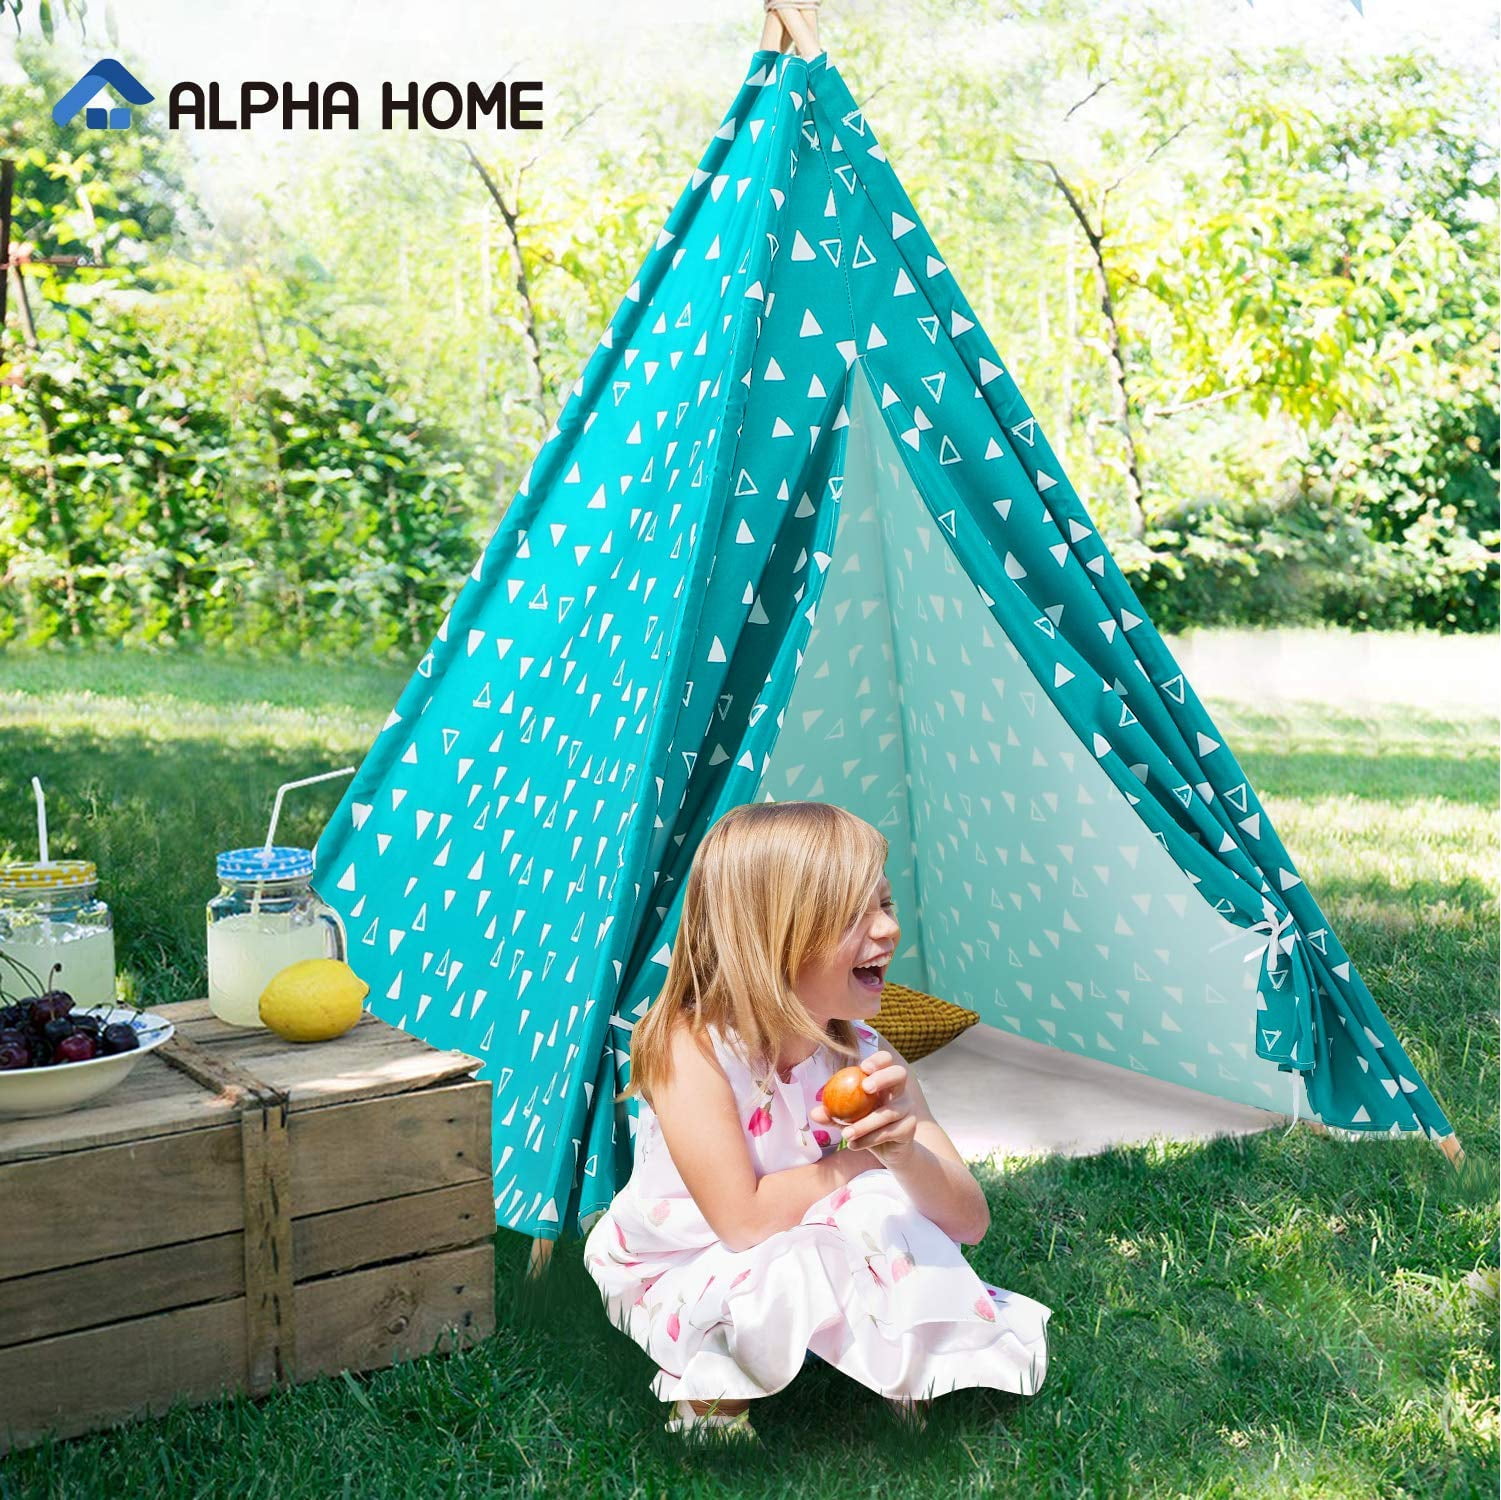 ALPHA HOME Teepee Tent for Kids Canvas Childs Play Teepee Tent Indoor & Outdoor with Carry Bag 58 x 58 x 56 